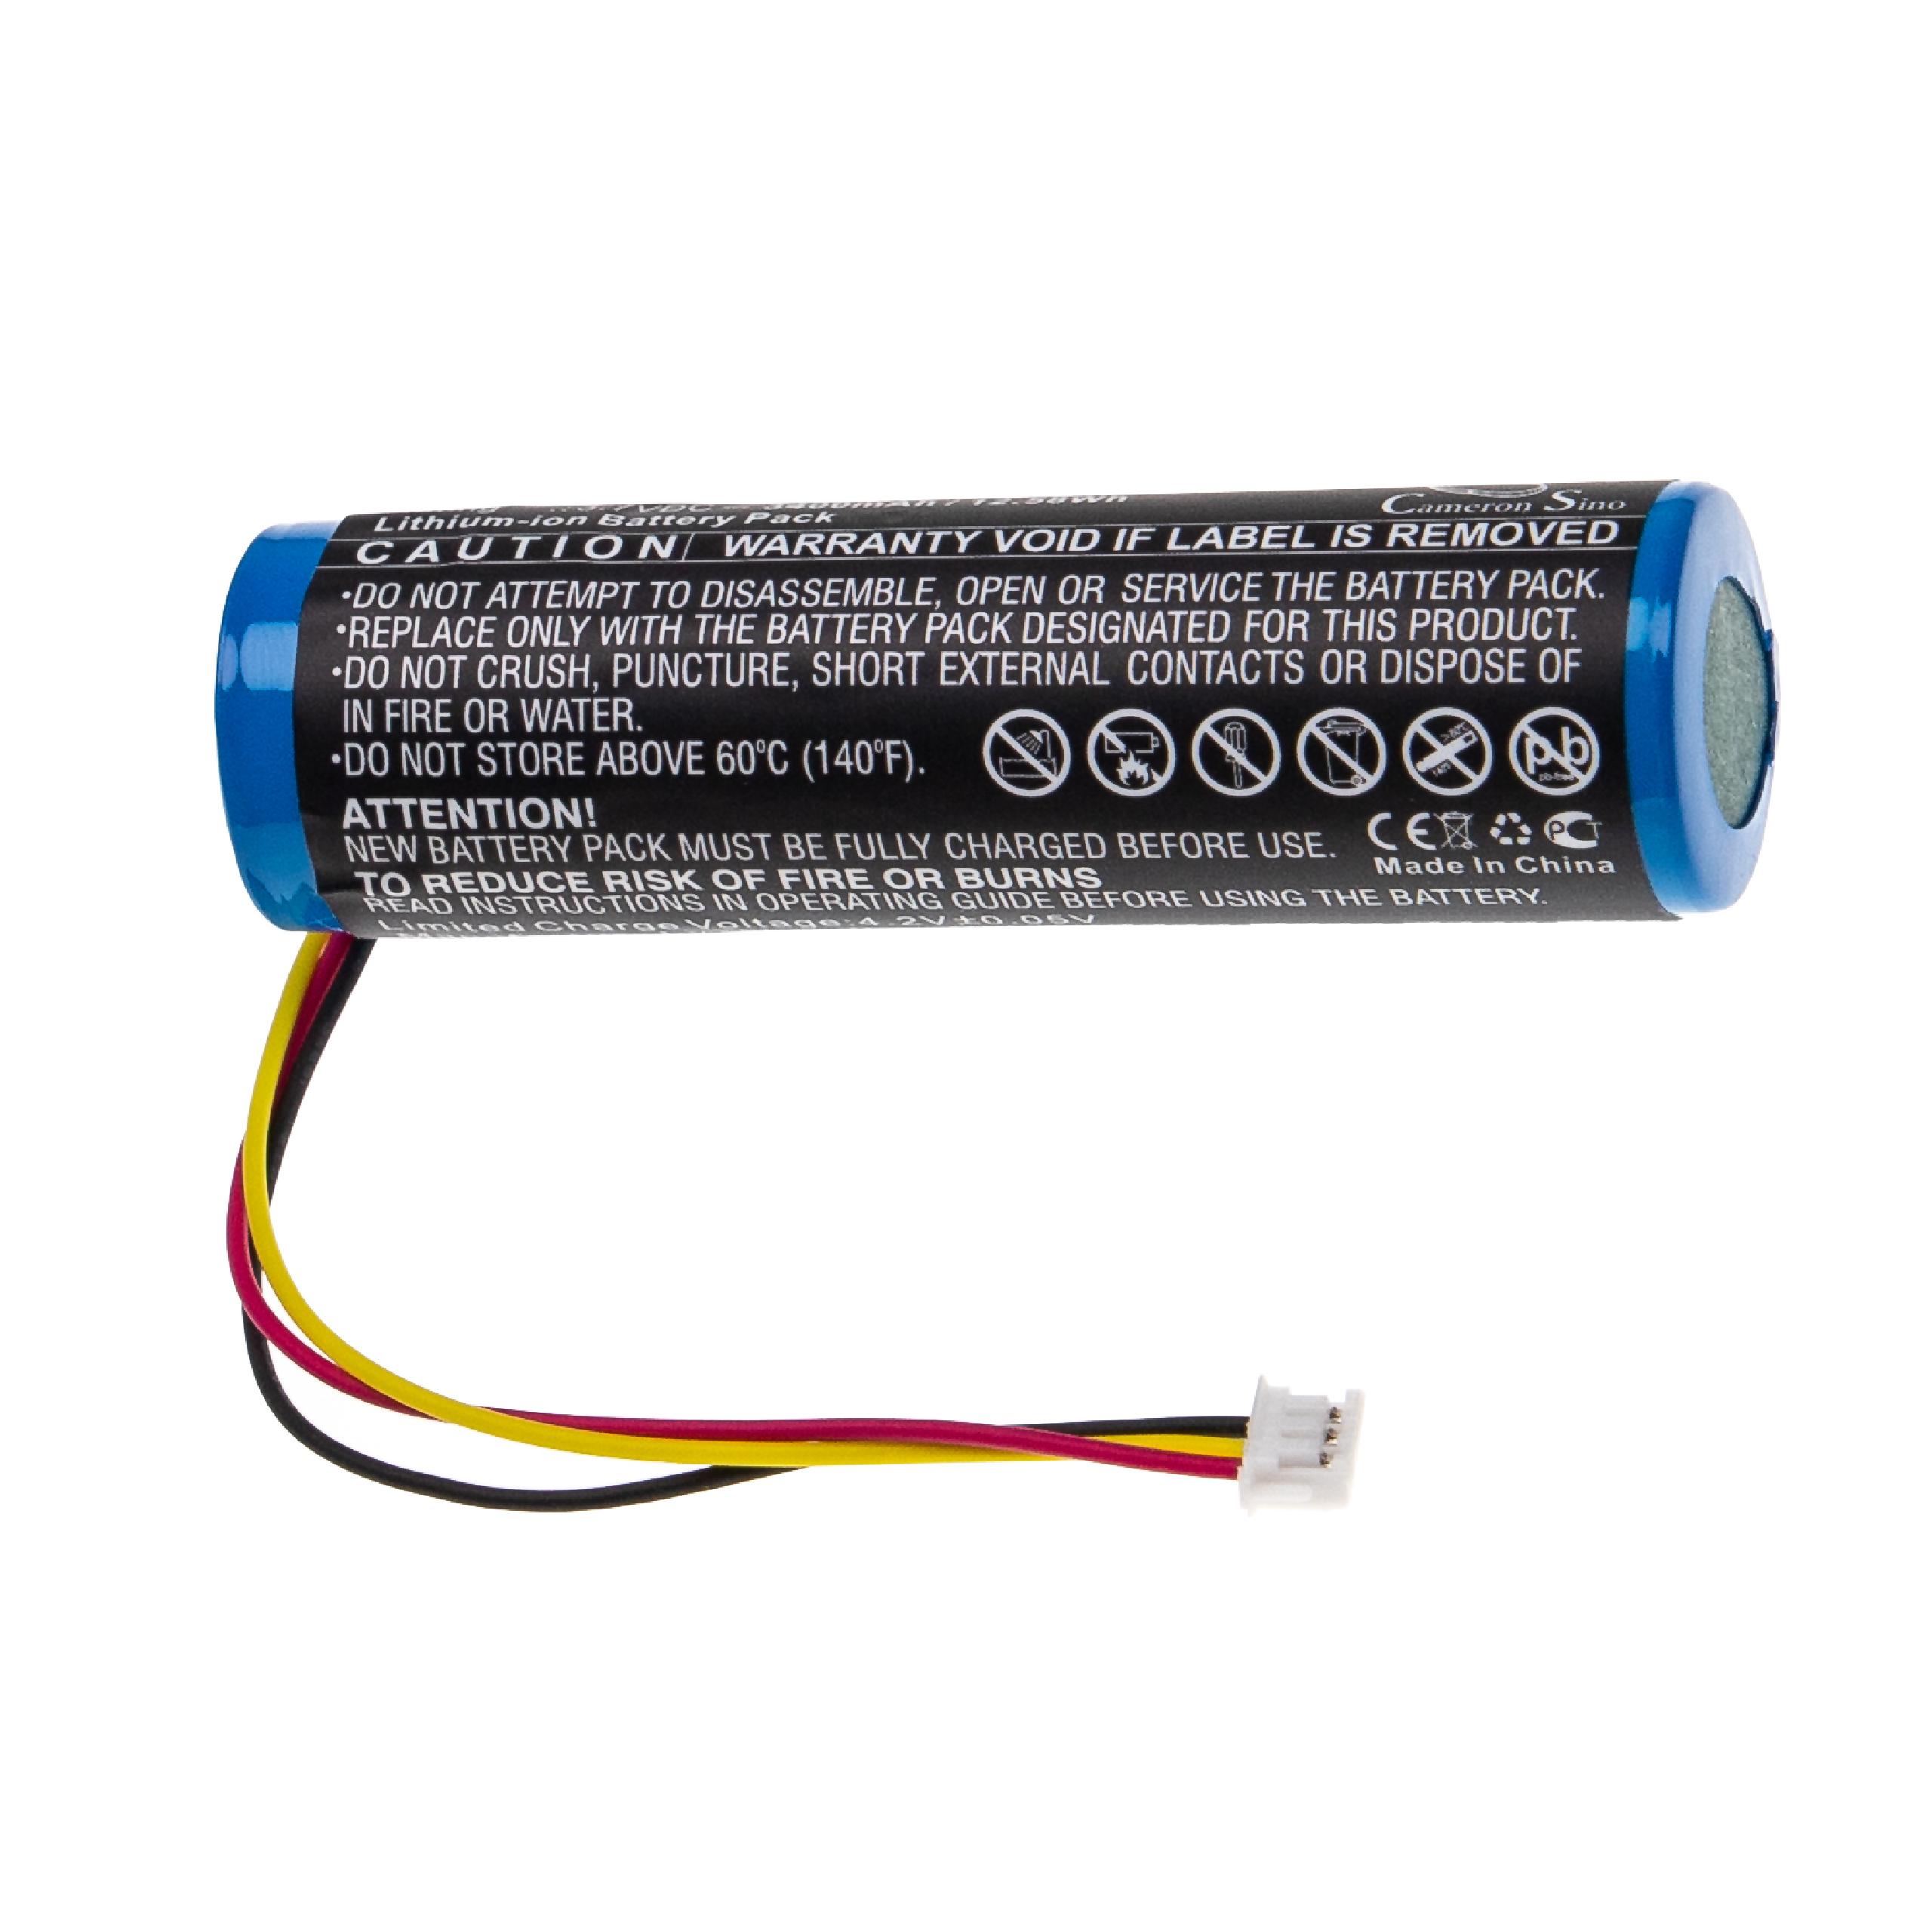 Wind Instrument Battery Replacement for AKAI 1ABTUR18650ZY01, NB2537-R0 - 3400mAh 3.7V Li-Ion